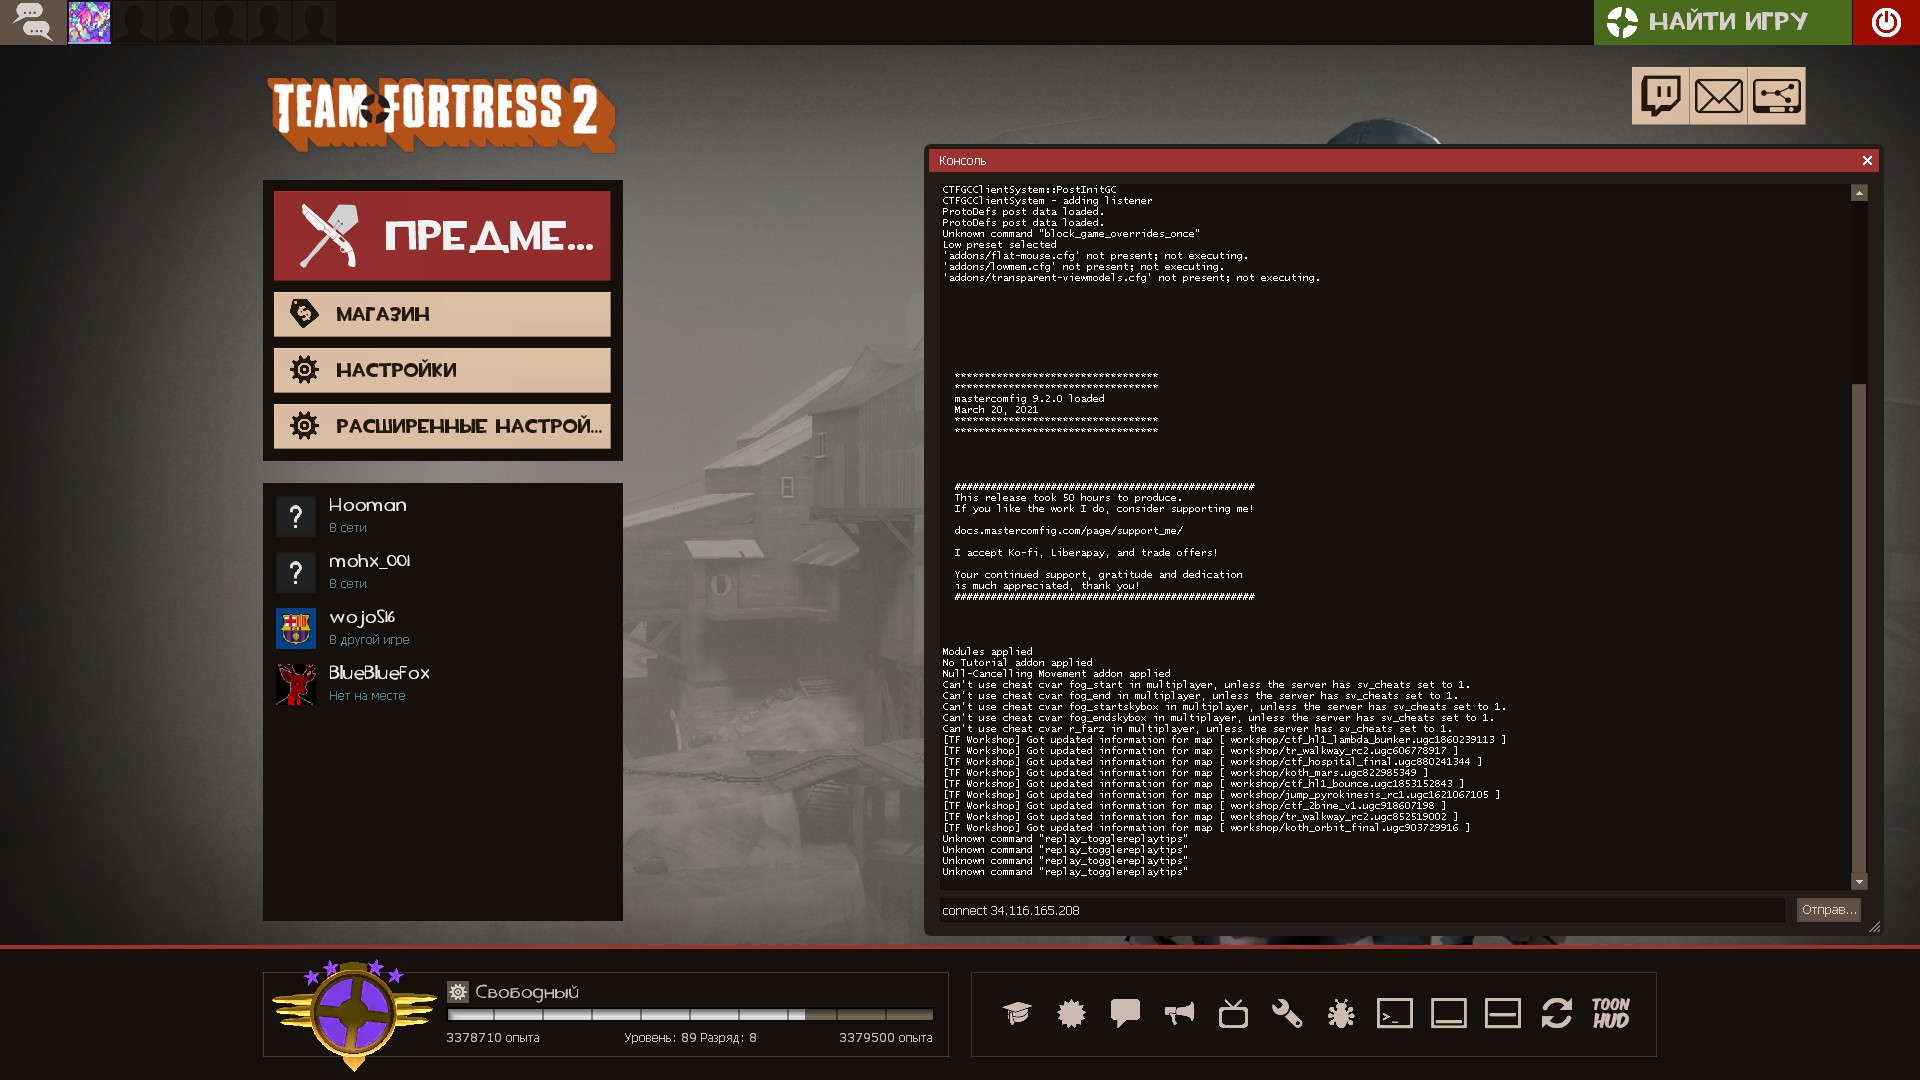 team fortress classic servers non steam roleplay